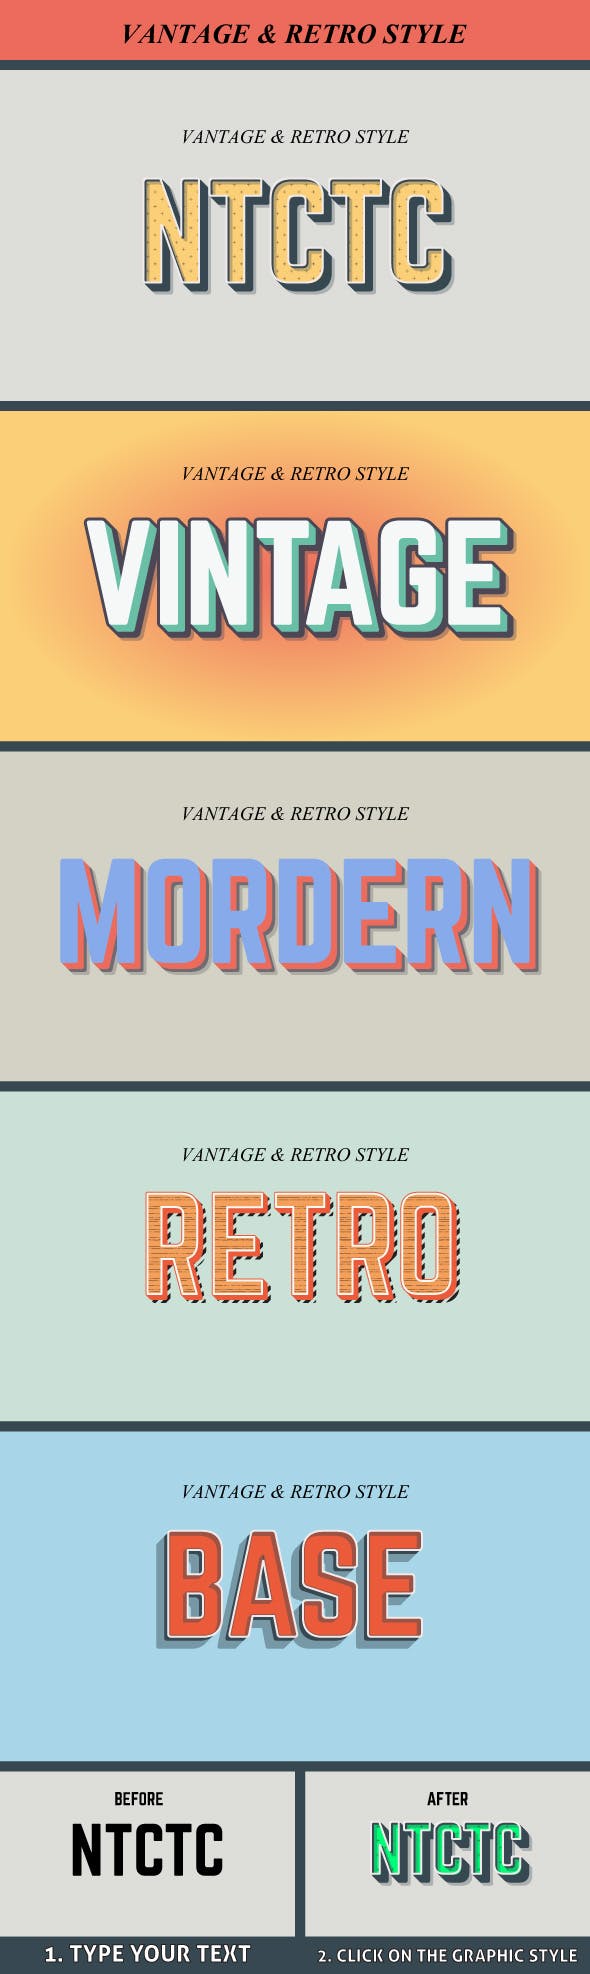 Vintage And Retro Graphic Style